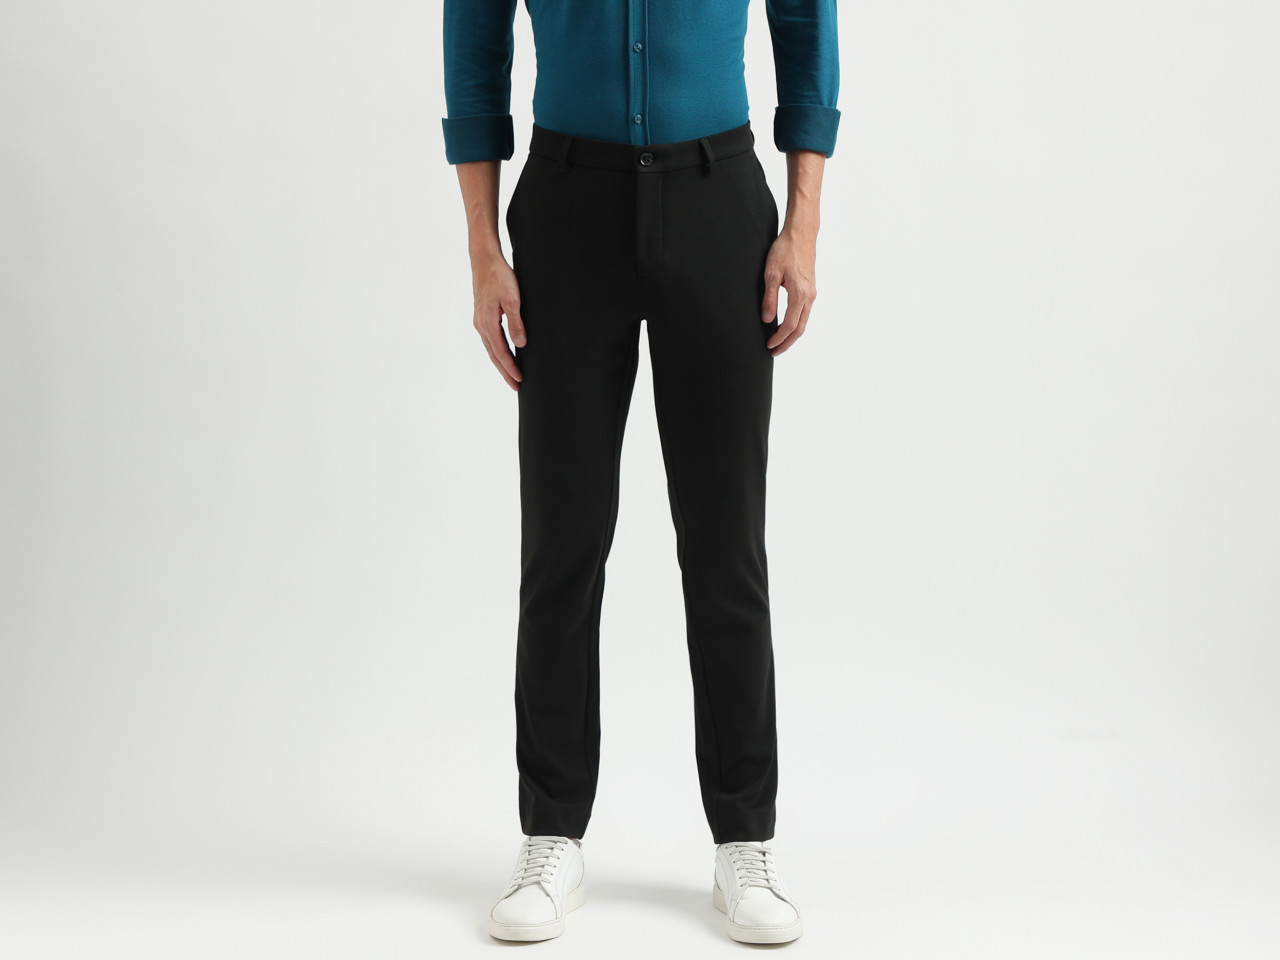 Buy Black Trousers & Pants for Women by UNITED COLORS OF BENETTON Online |  Ajio.com